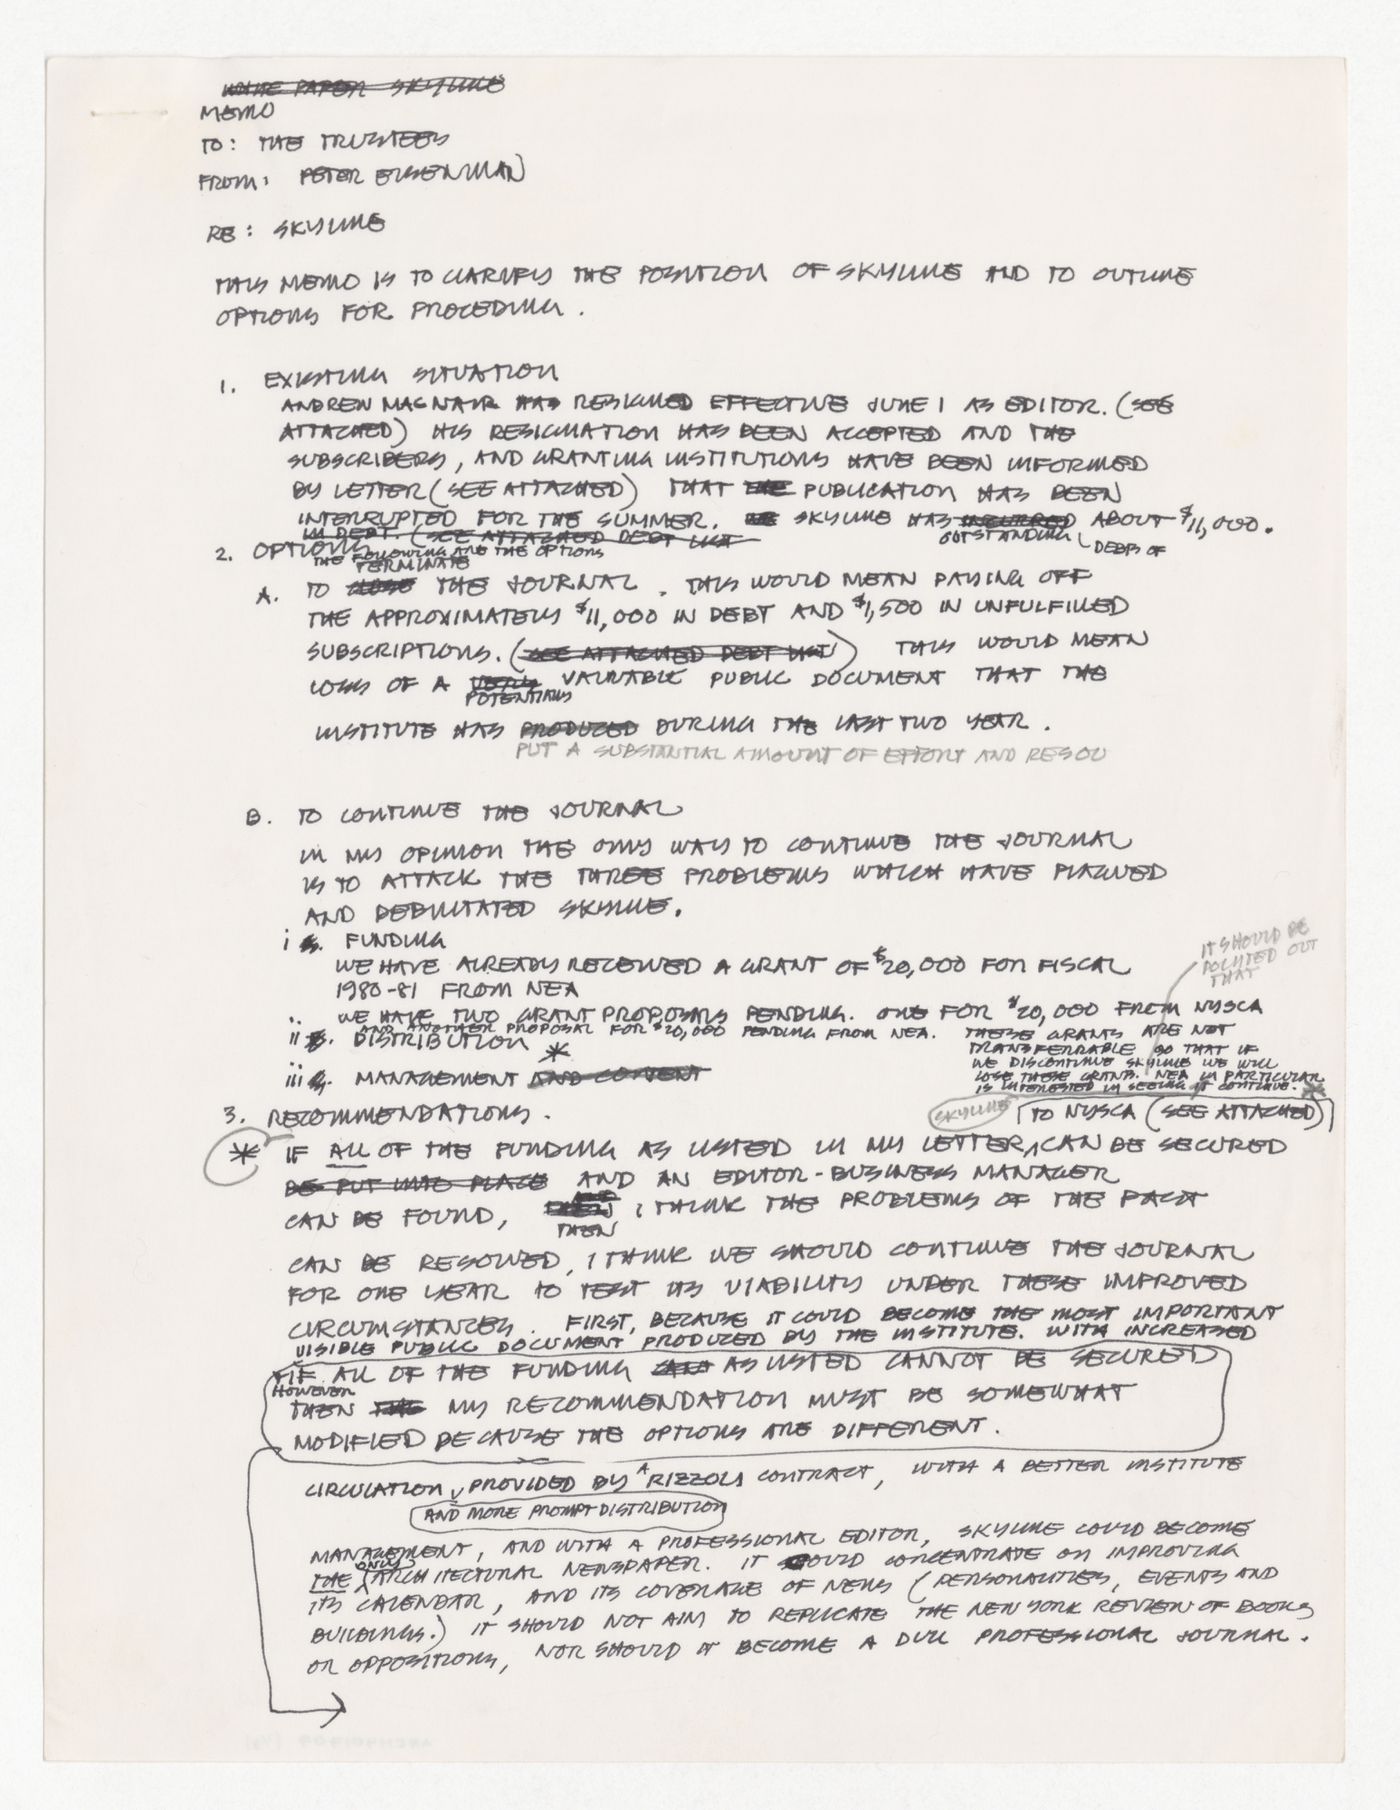 Draft memorandum from Peter D. Eisenman to the Trustees about publication of Skyline